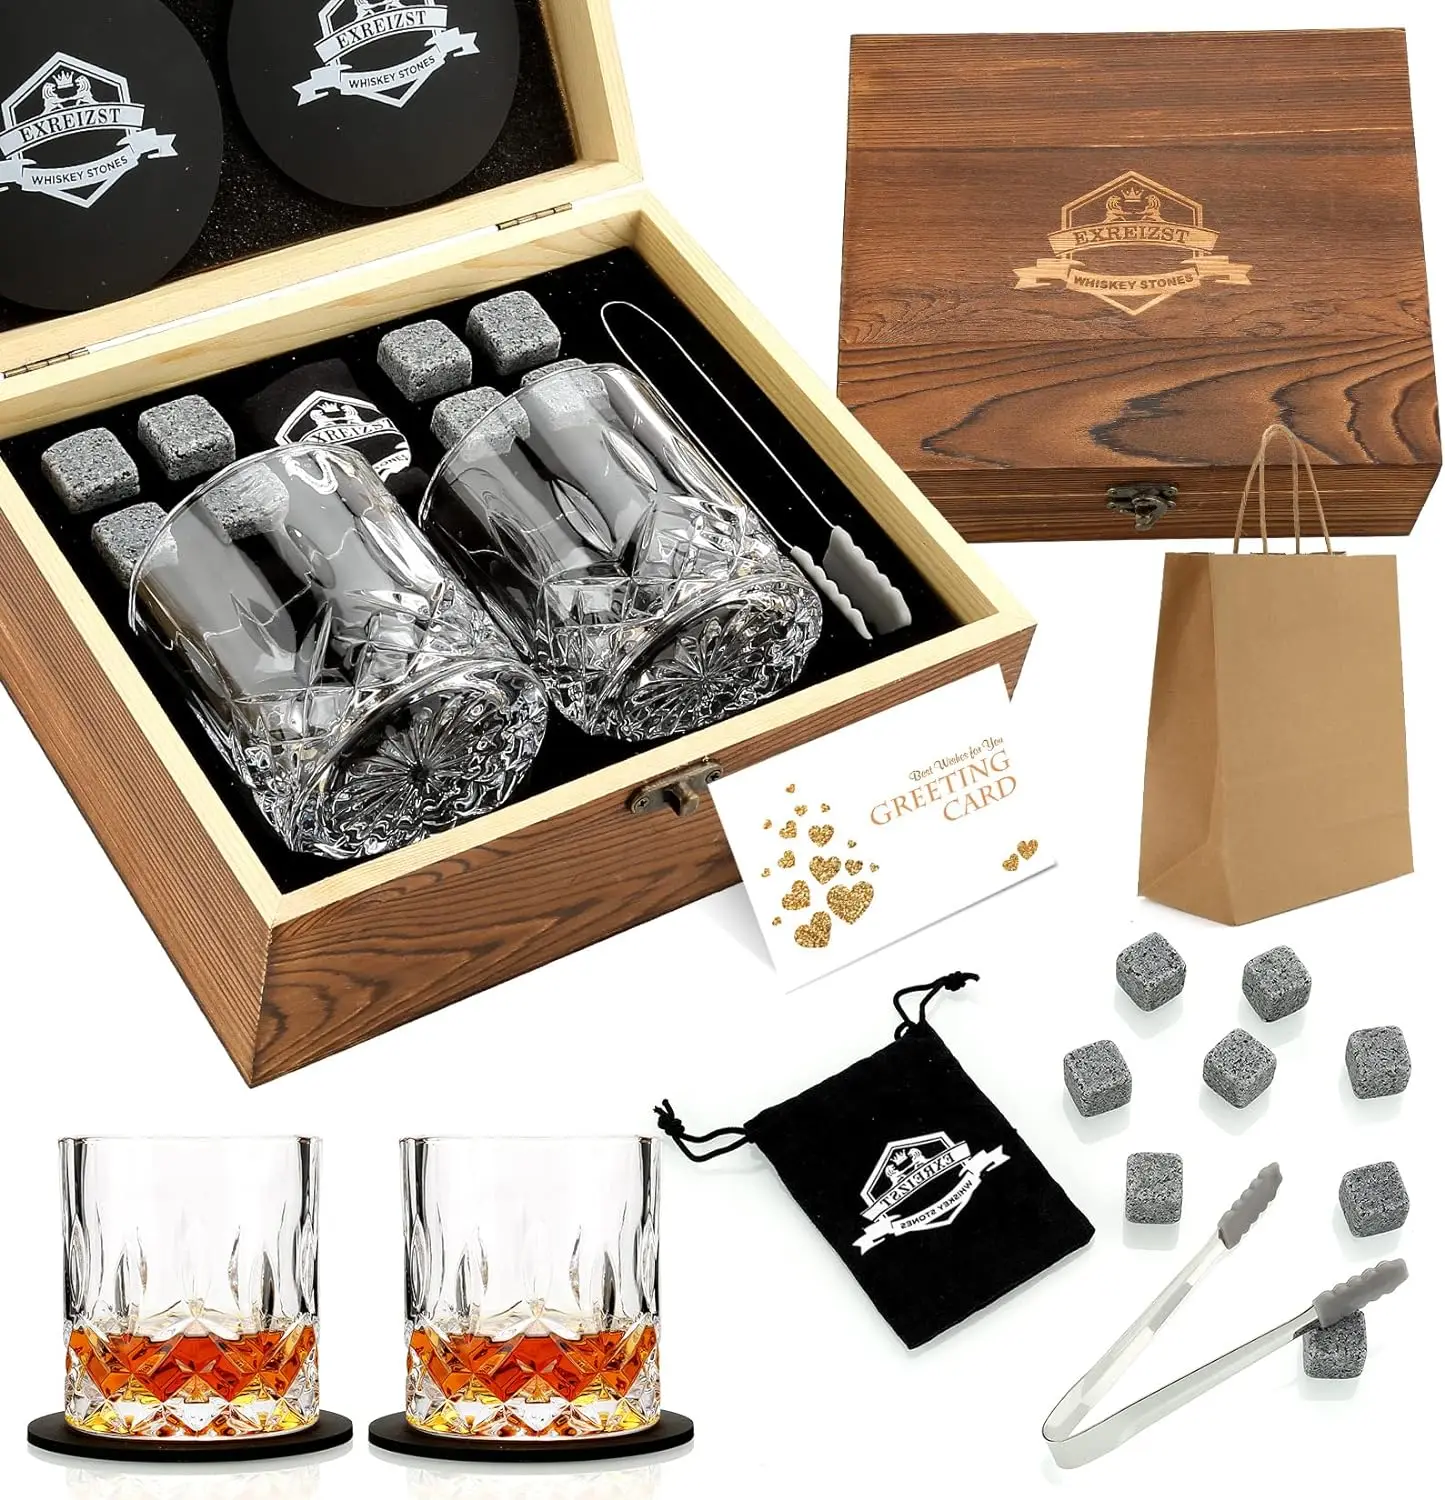 Whiskey Glass Set of 2 - Bourbon Glass & Stones Gift Includes  Old Fashioned Crystal Whisky Glasses, Chilling Stones, Slate Coasters -  Whiskey Glasses Set in Wooden Box - Birthday